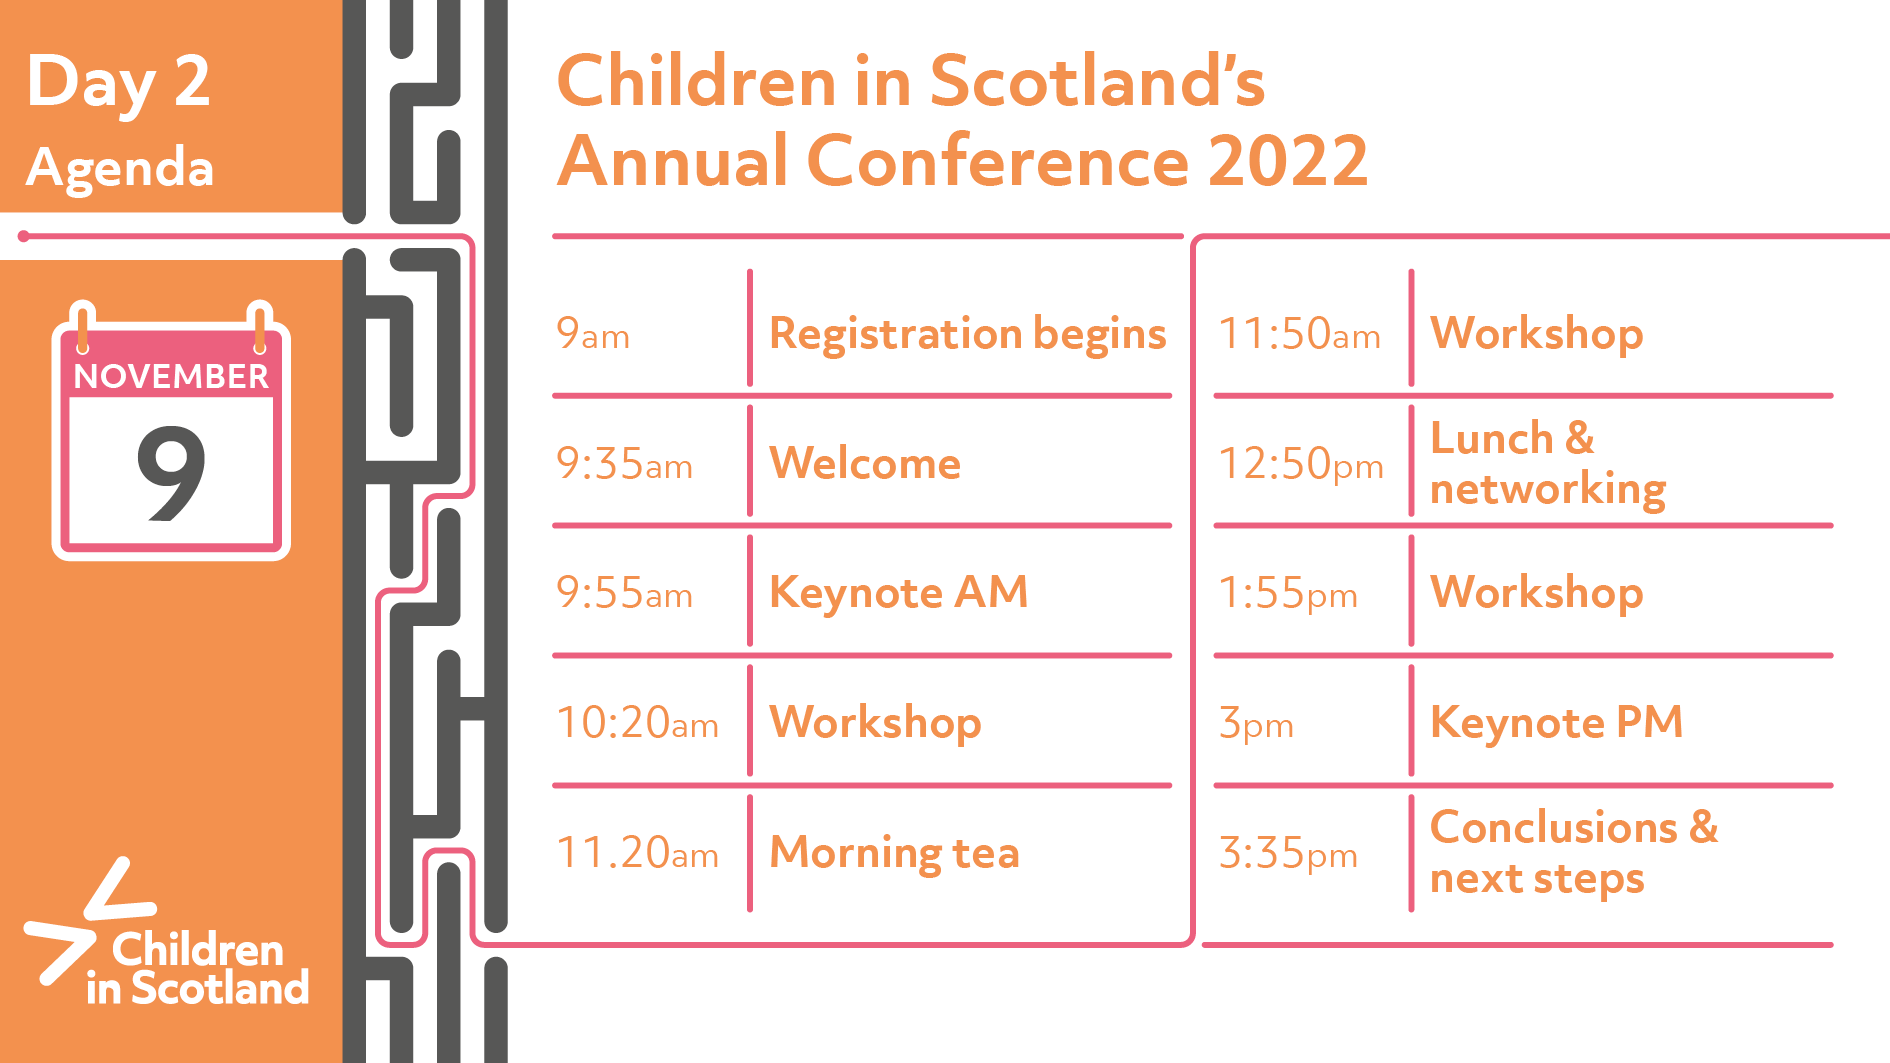 Annual conference agenda day 2. 9am registration. 9:35 welcome. 9:55am keynote AM. 10:30am workshop. 11:20am morning tea. 11:50am workshop. 12:50pm lunch & networking. 1:55pm workshop. 3pm keynote. 3:35pm conclusions & next steps